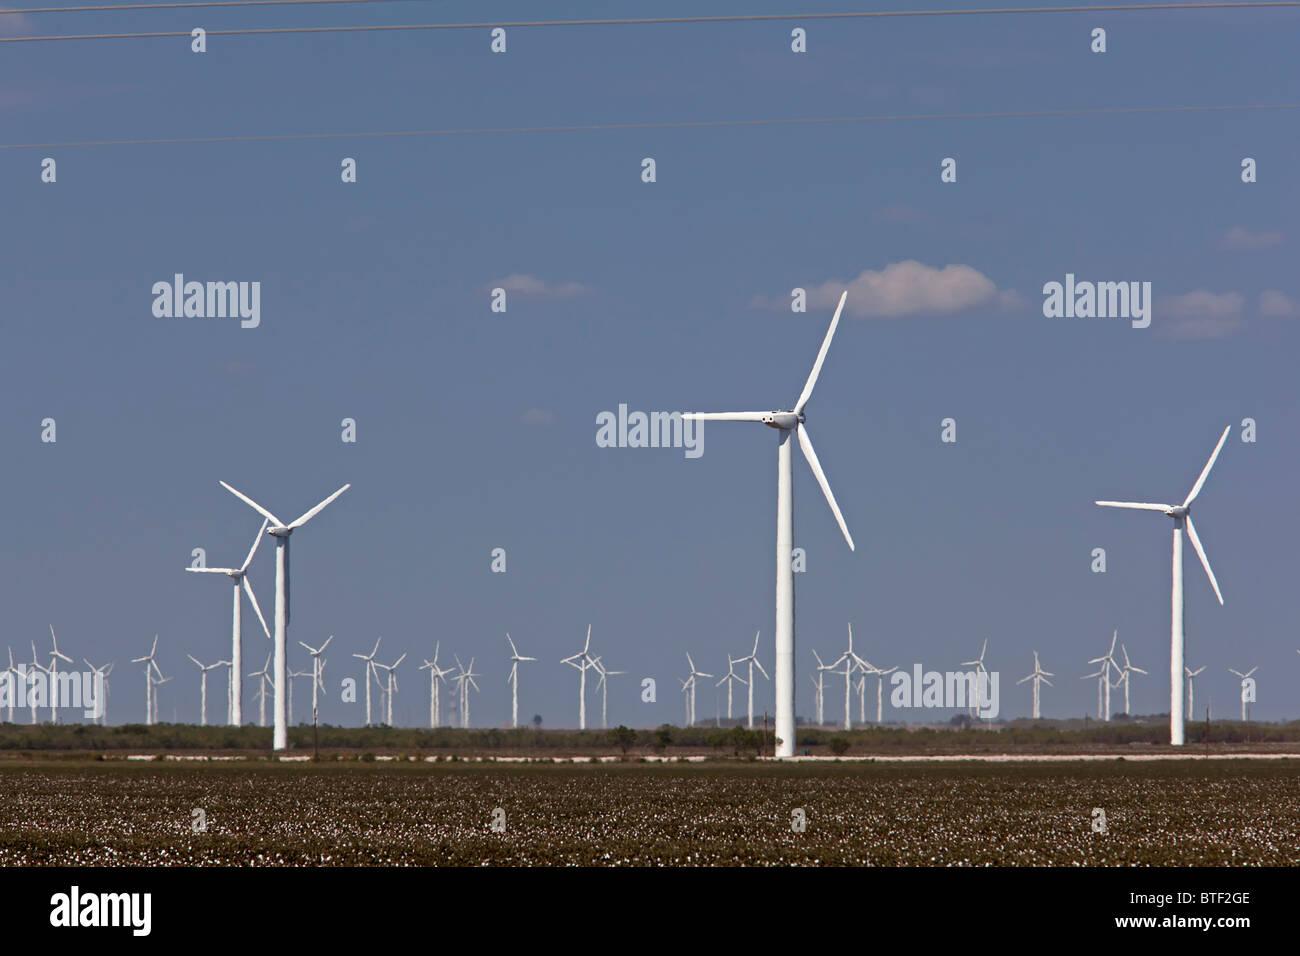 Colorado City, Texas - Wind turbines in a cotton field in west Texas. Stock Photo